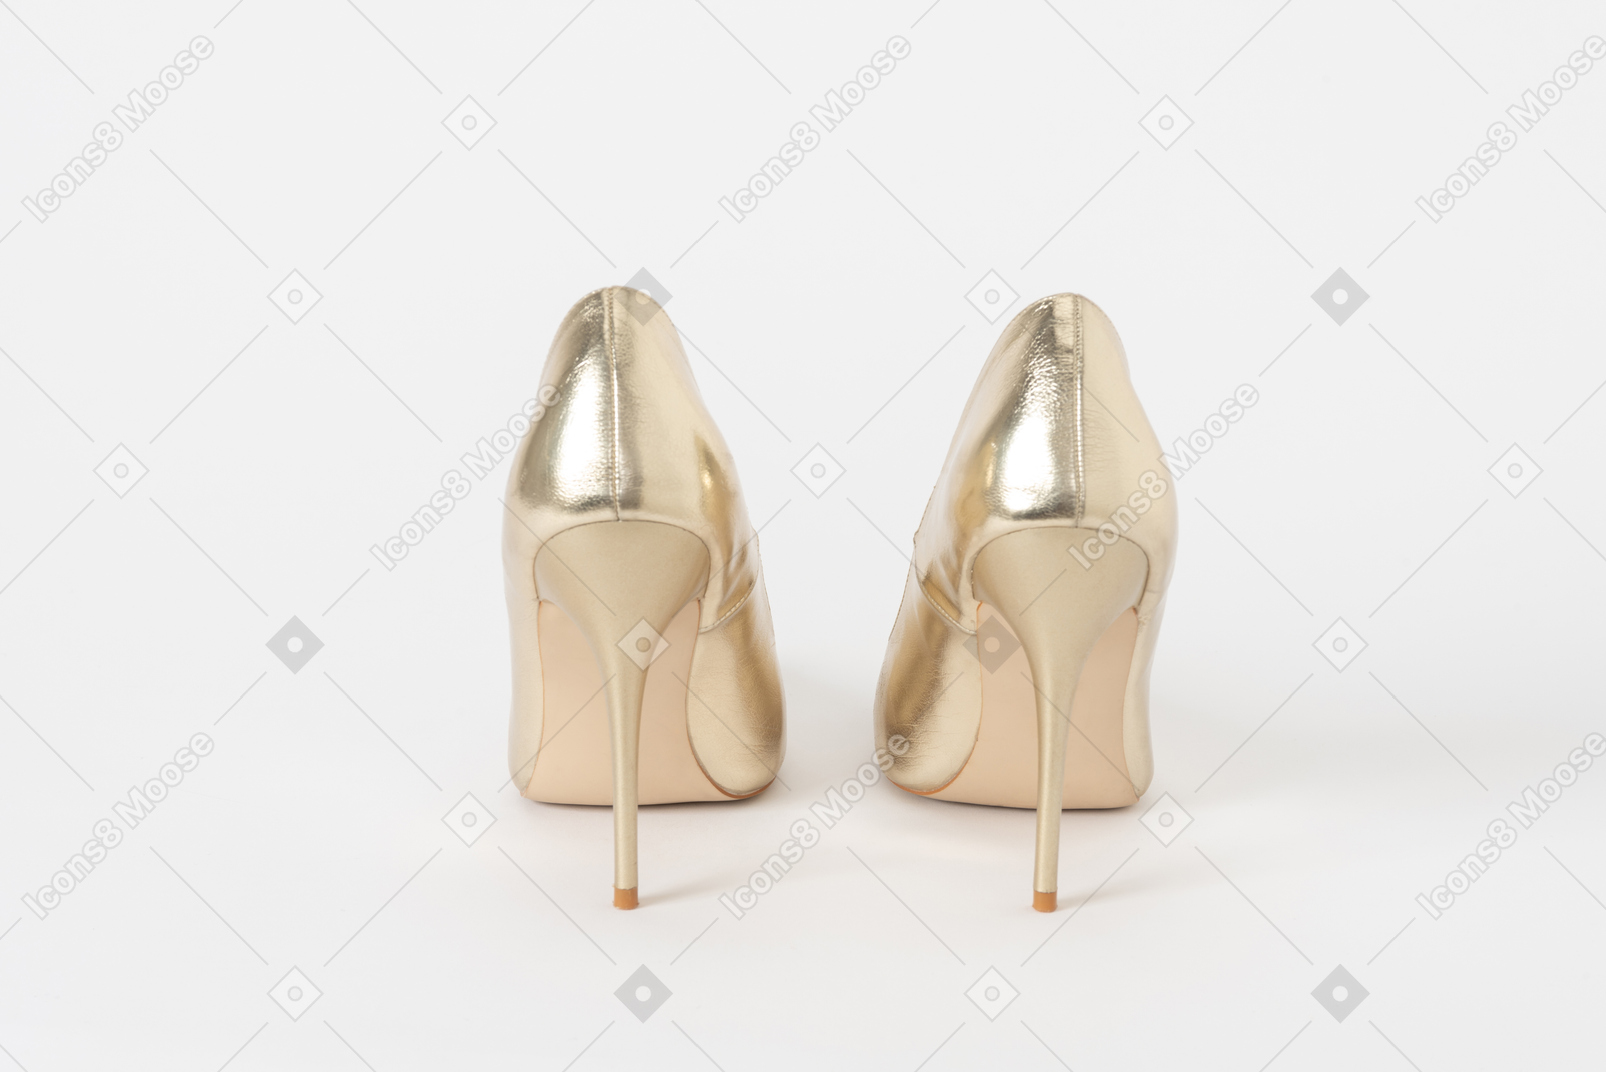 A back shot of a pair of shiny stiletto shoes